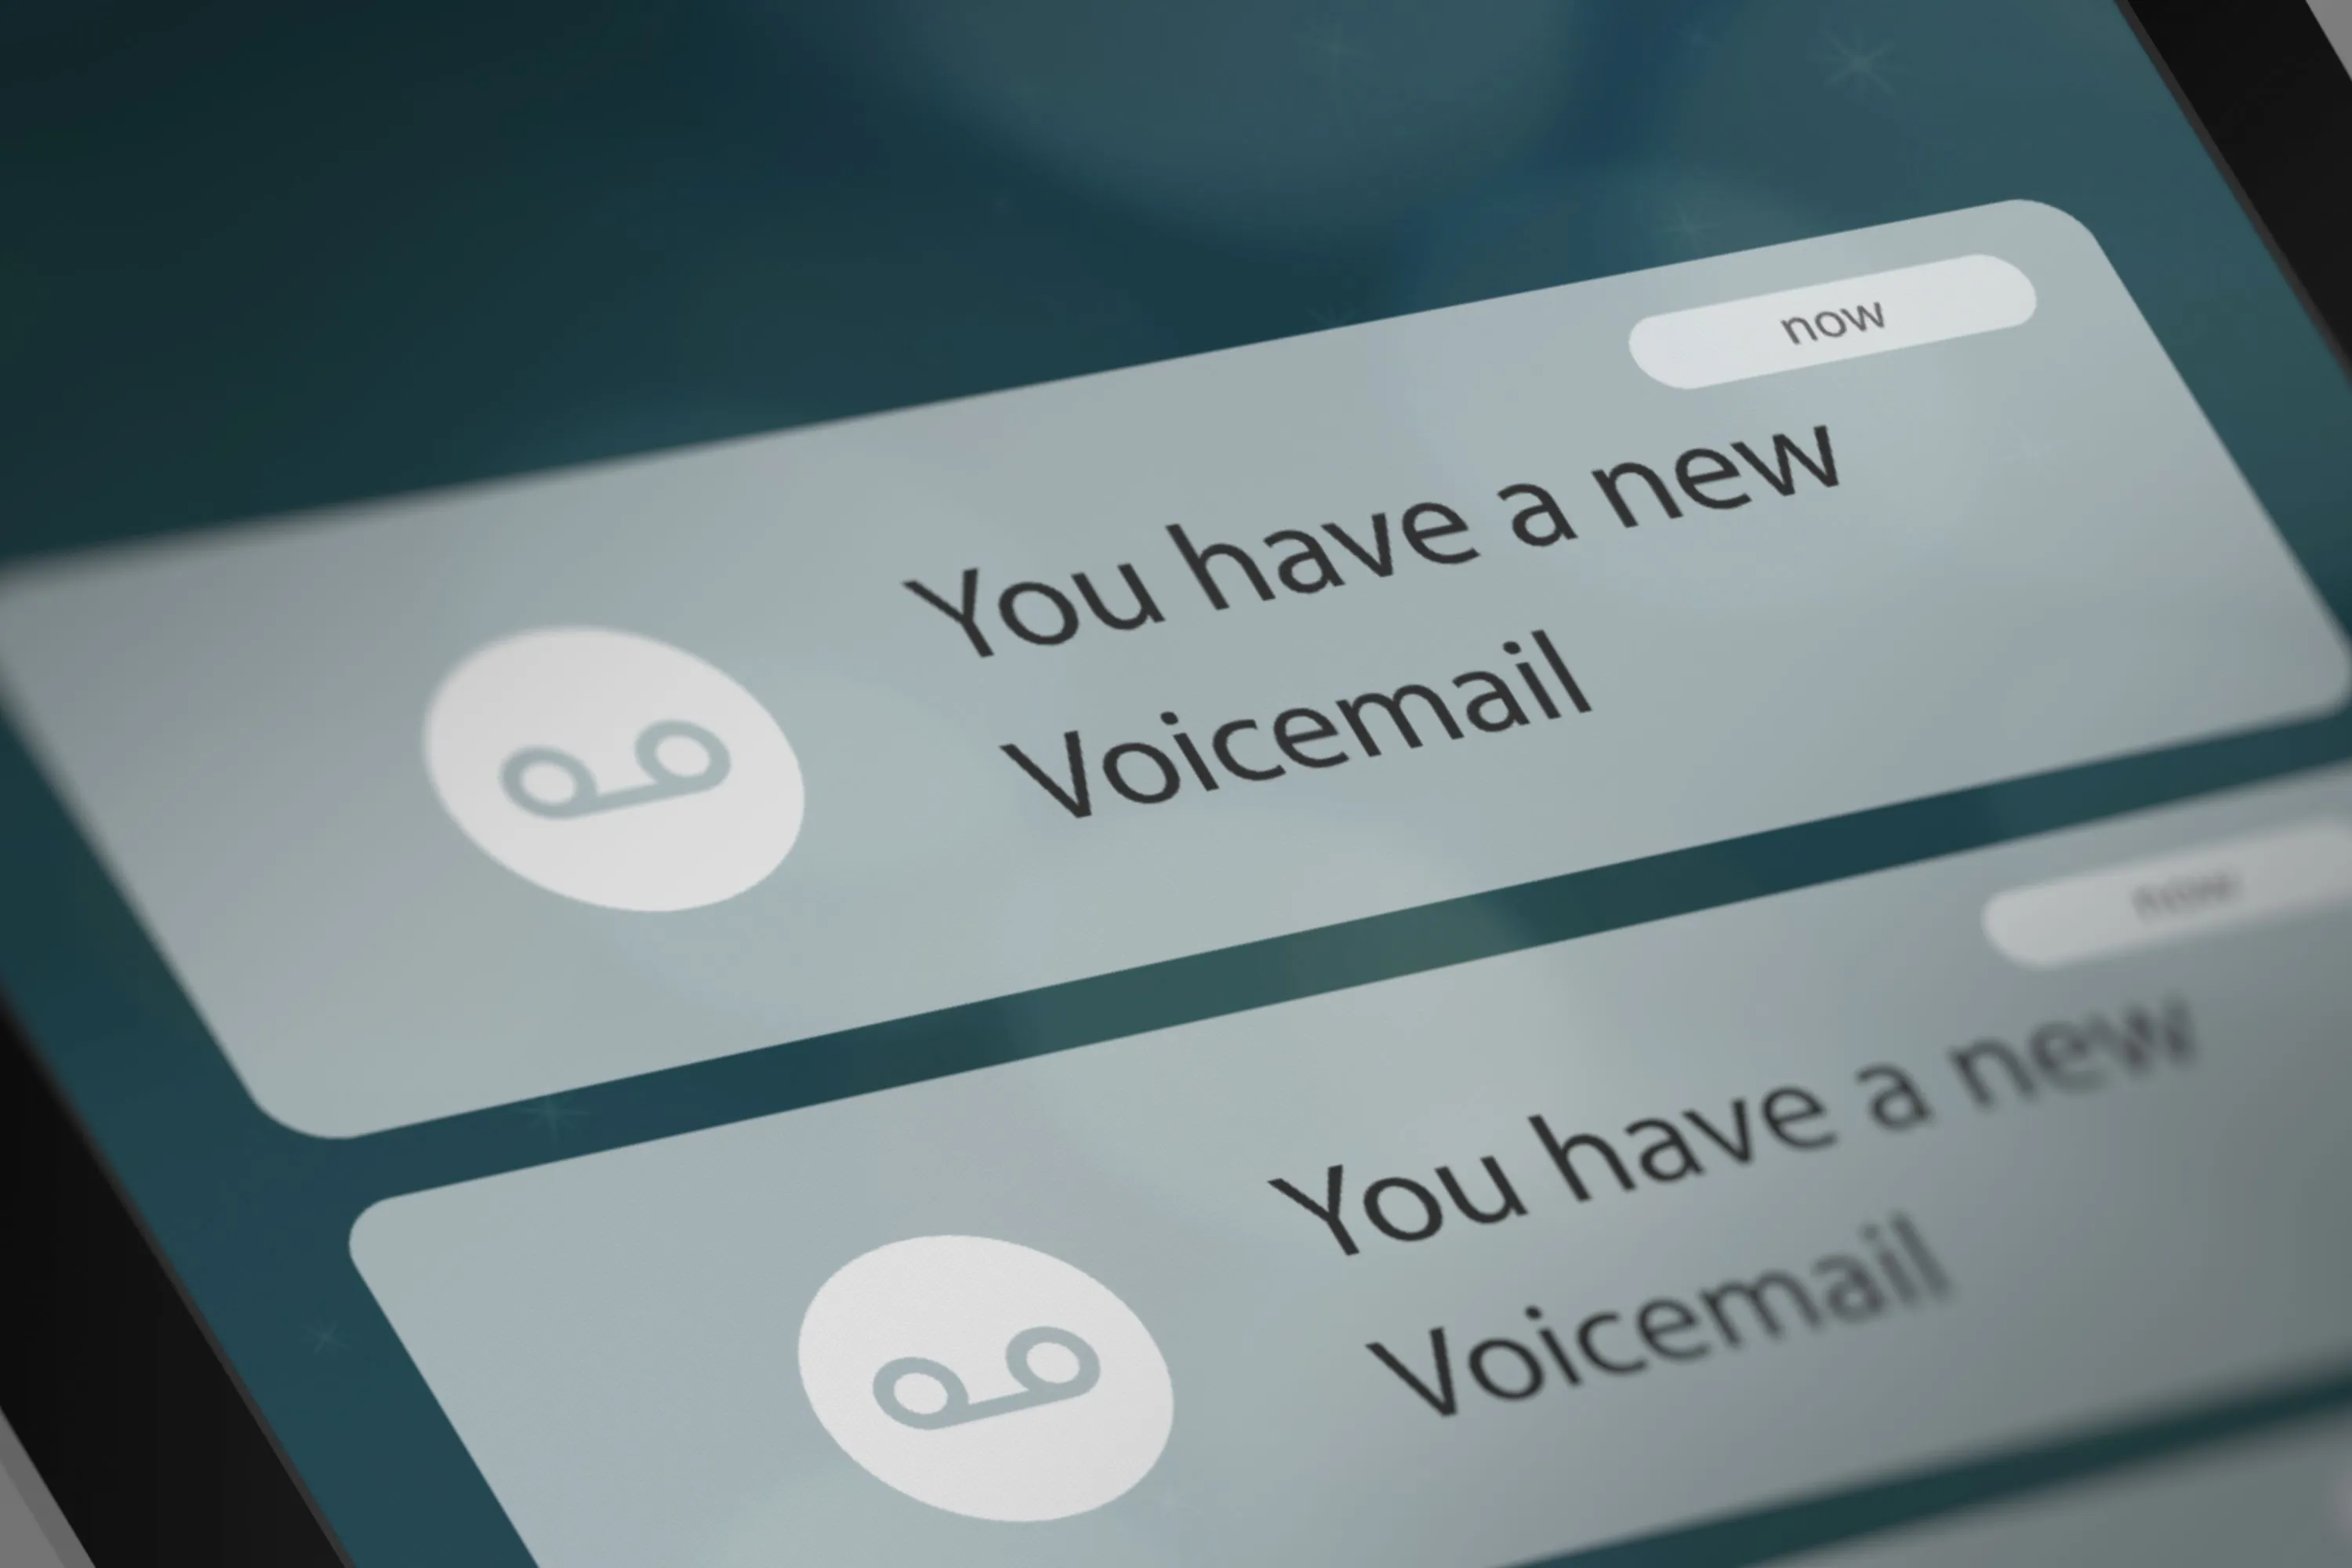 Voice mail notification